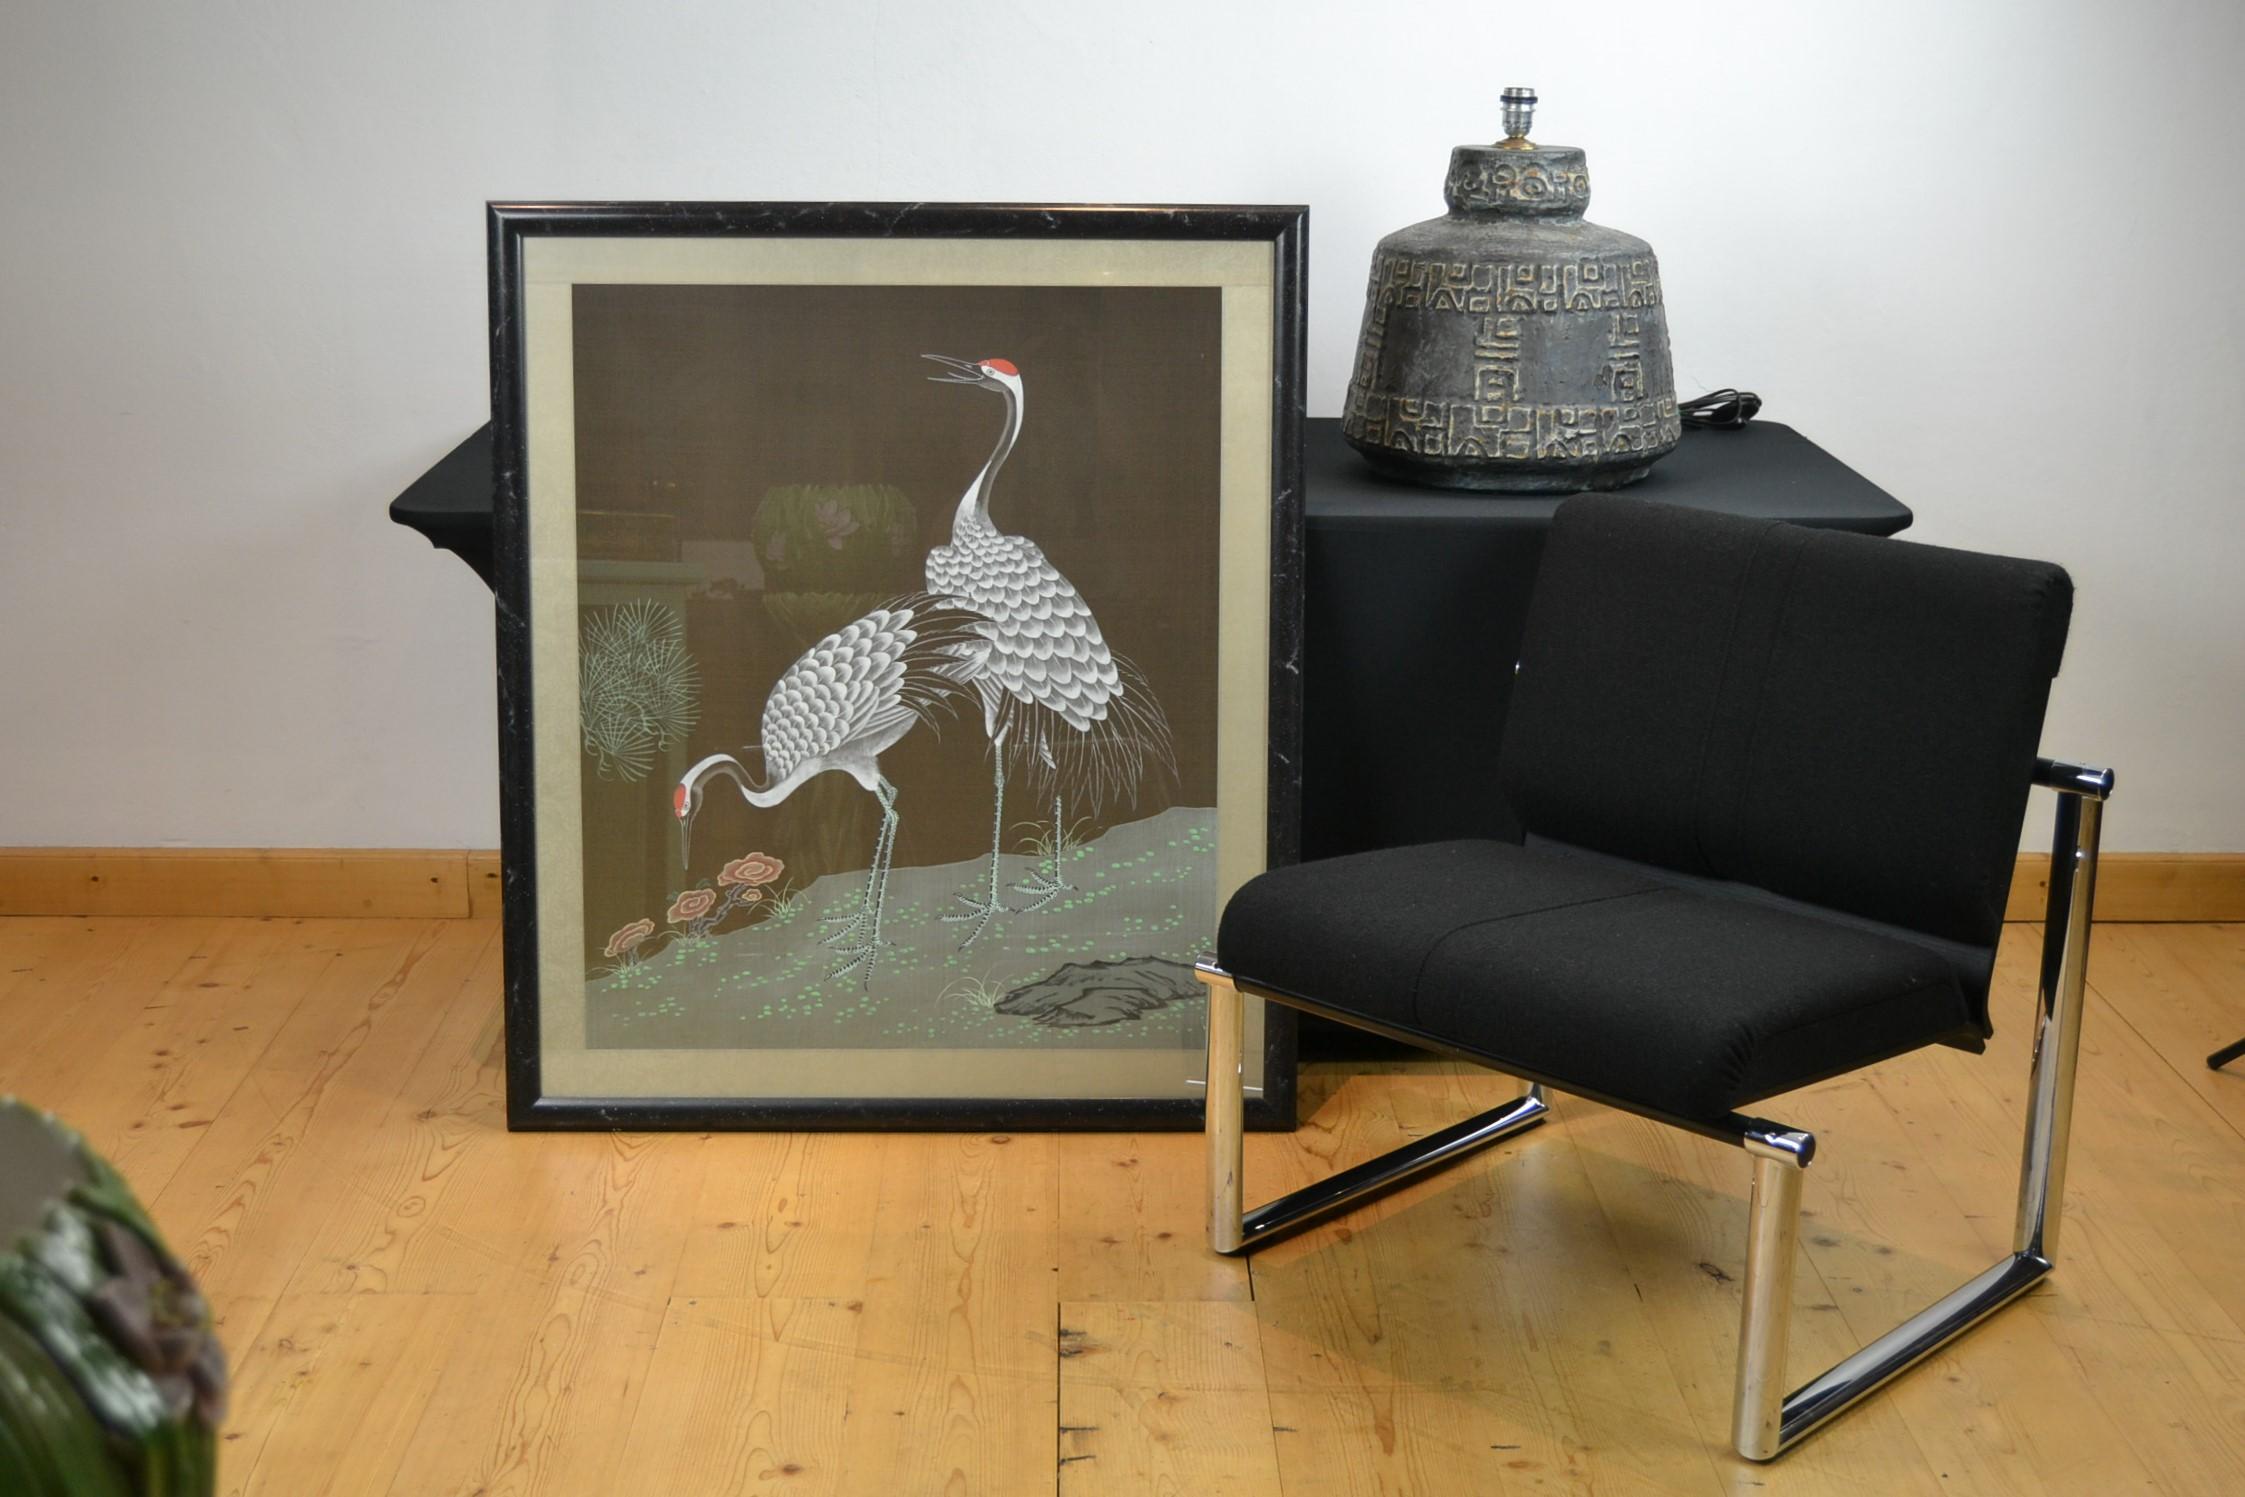 Bird artwork on silk with red crowned cranes or manchurian cranes.
This large and stylish framed work with two Japanese crane birds will look great in your interior. 
It's stylish wall decoration with a landscape scene with two crane birds and